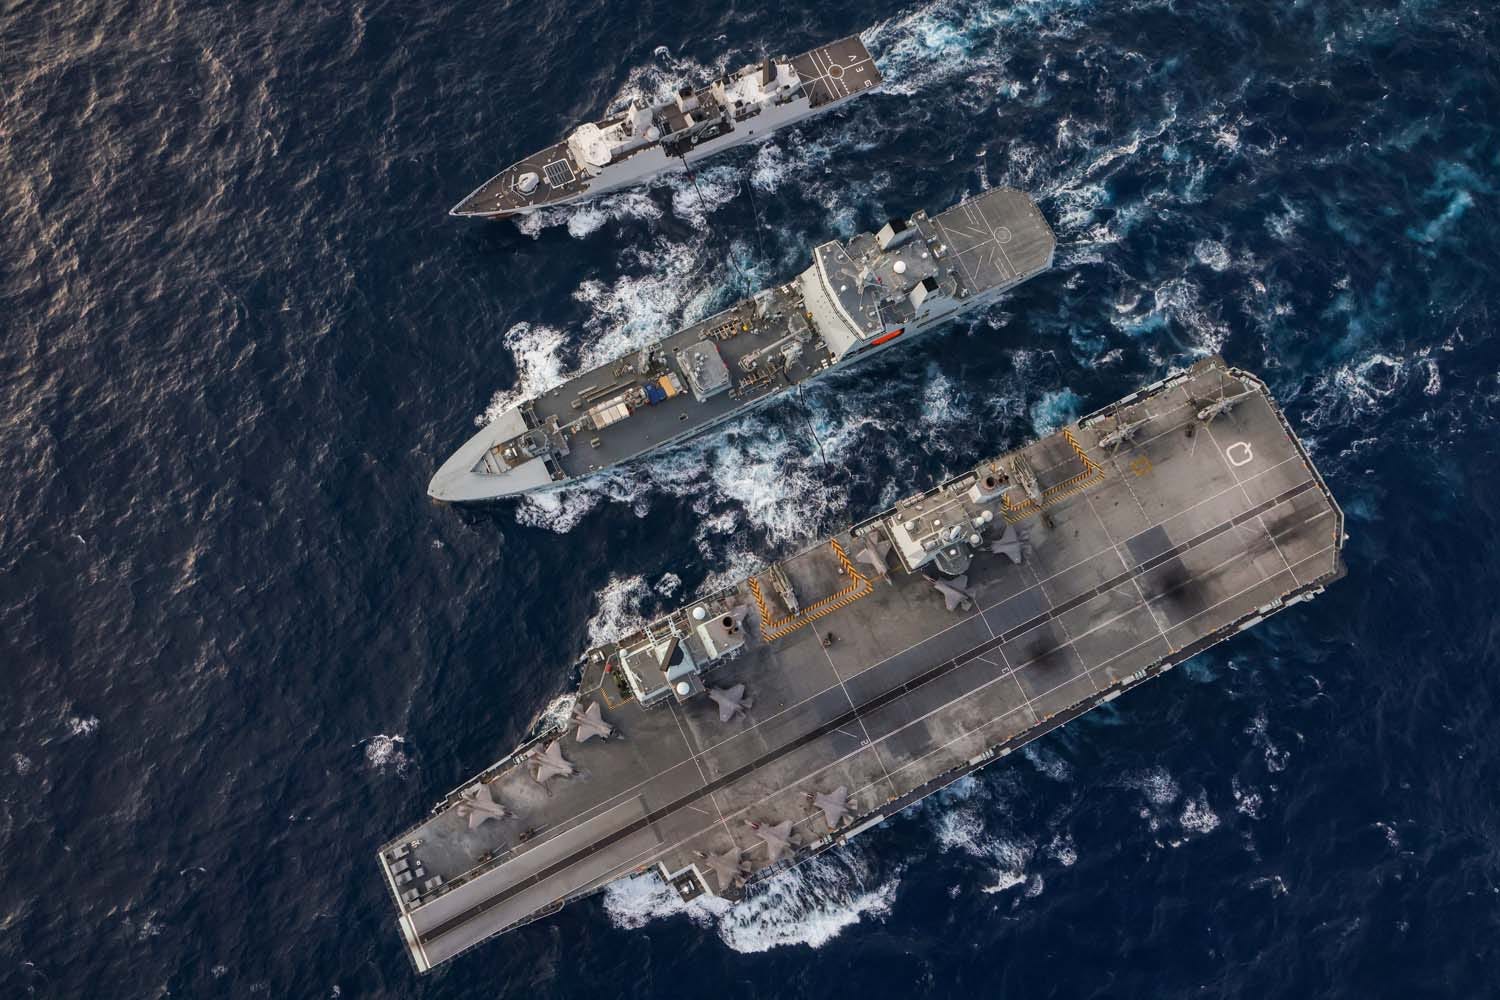 RFA Tidespring replenishment at sea with HMS Queen Elizabeth HNLMS Evertsen